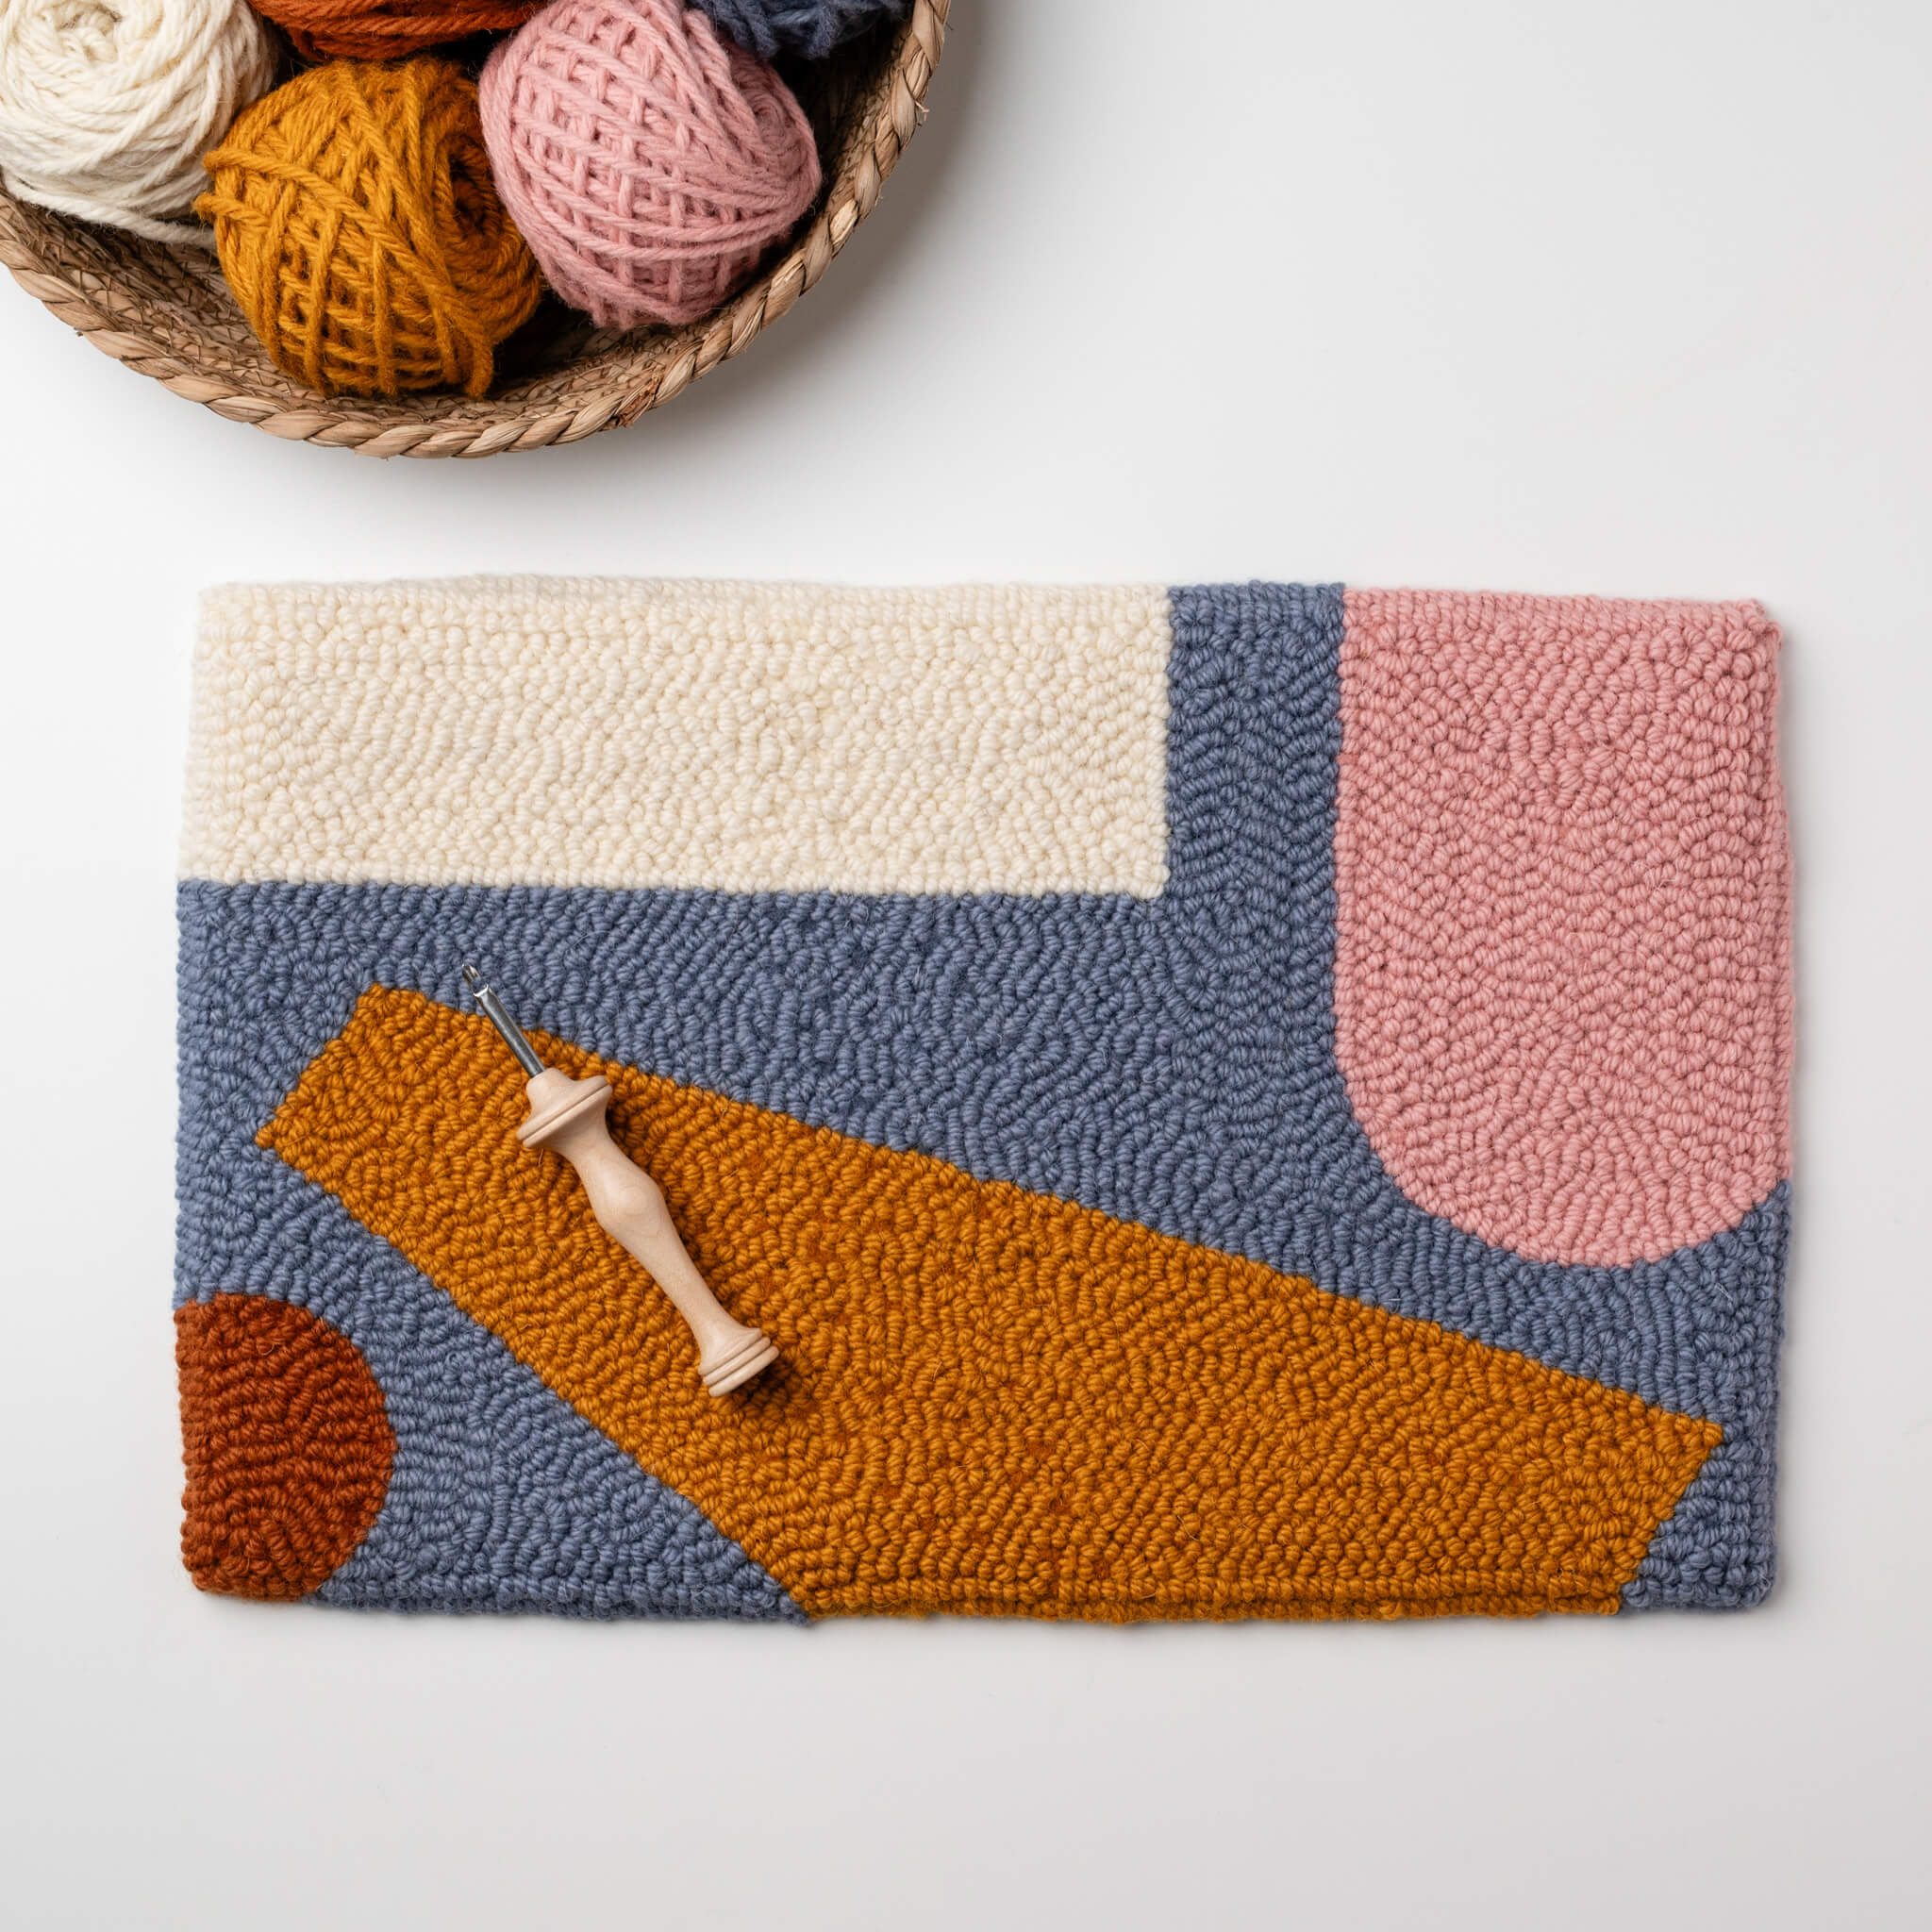 You Don't Need Knitting Experience to Craft This Rug